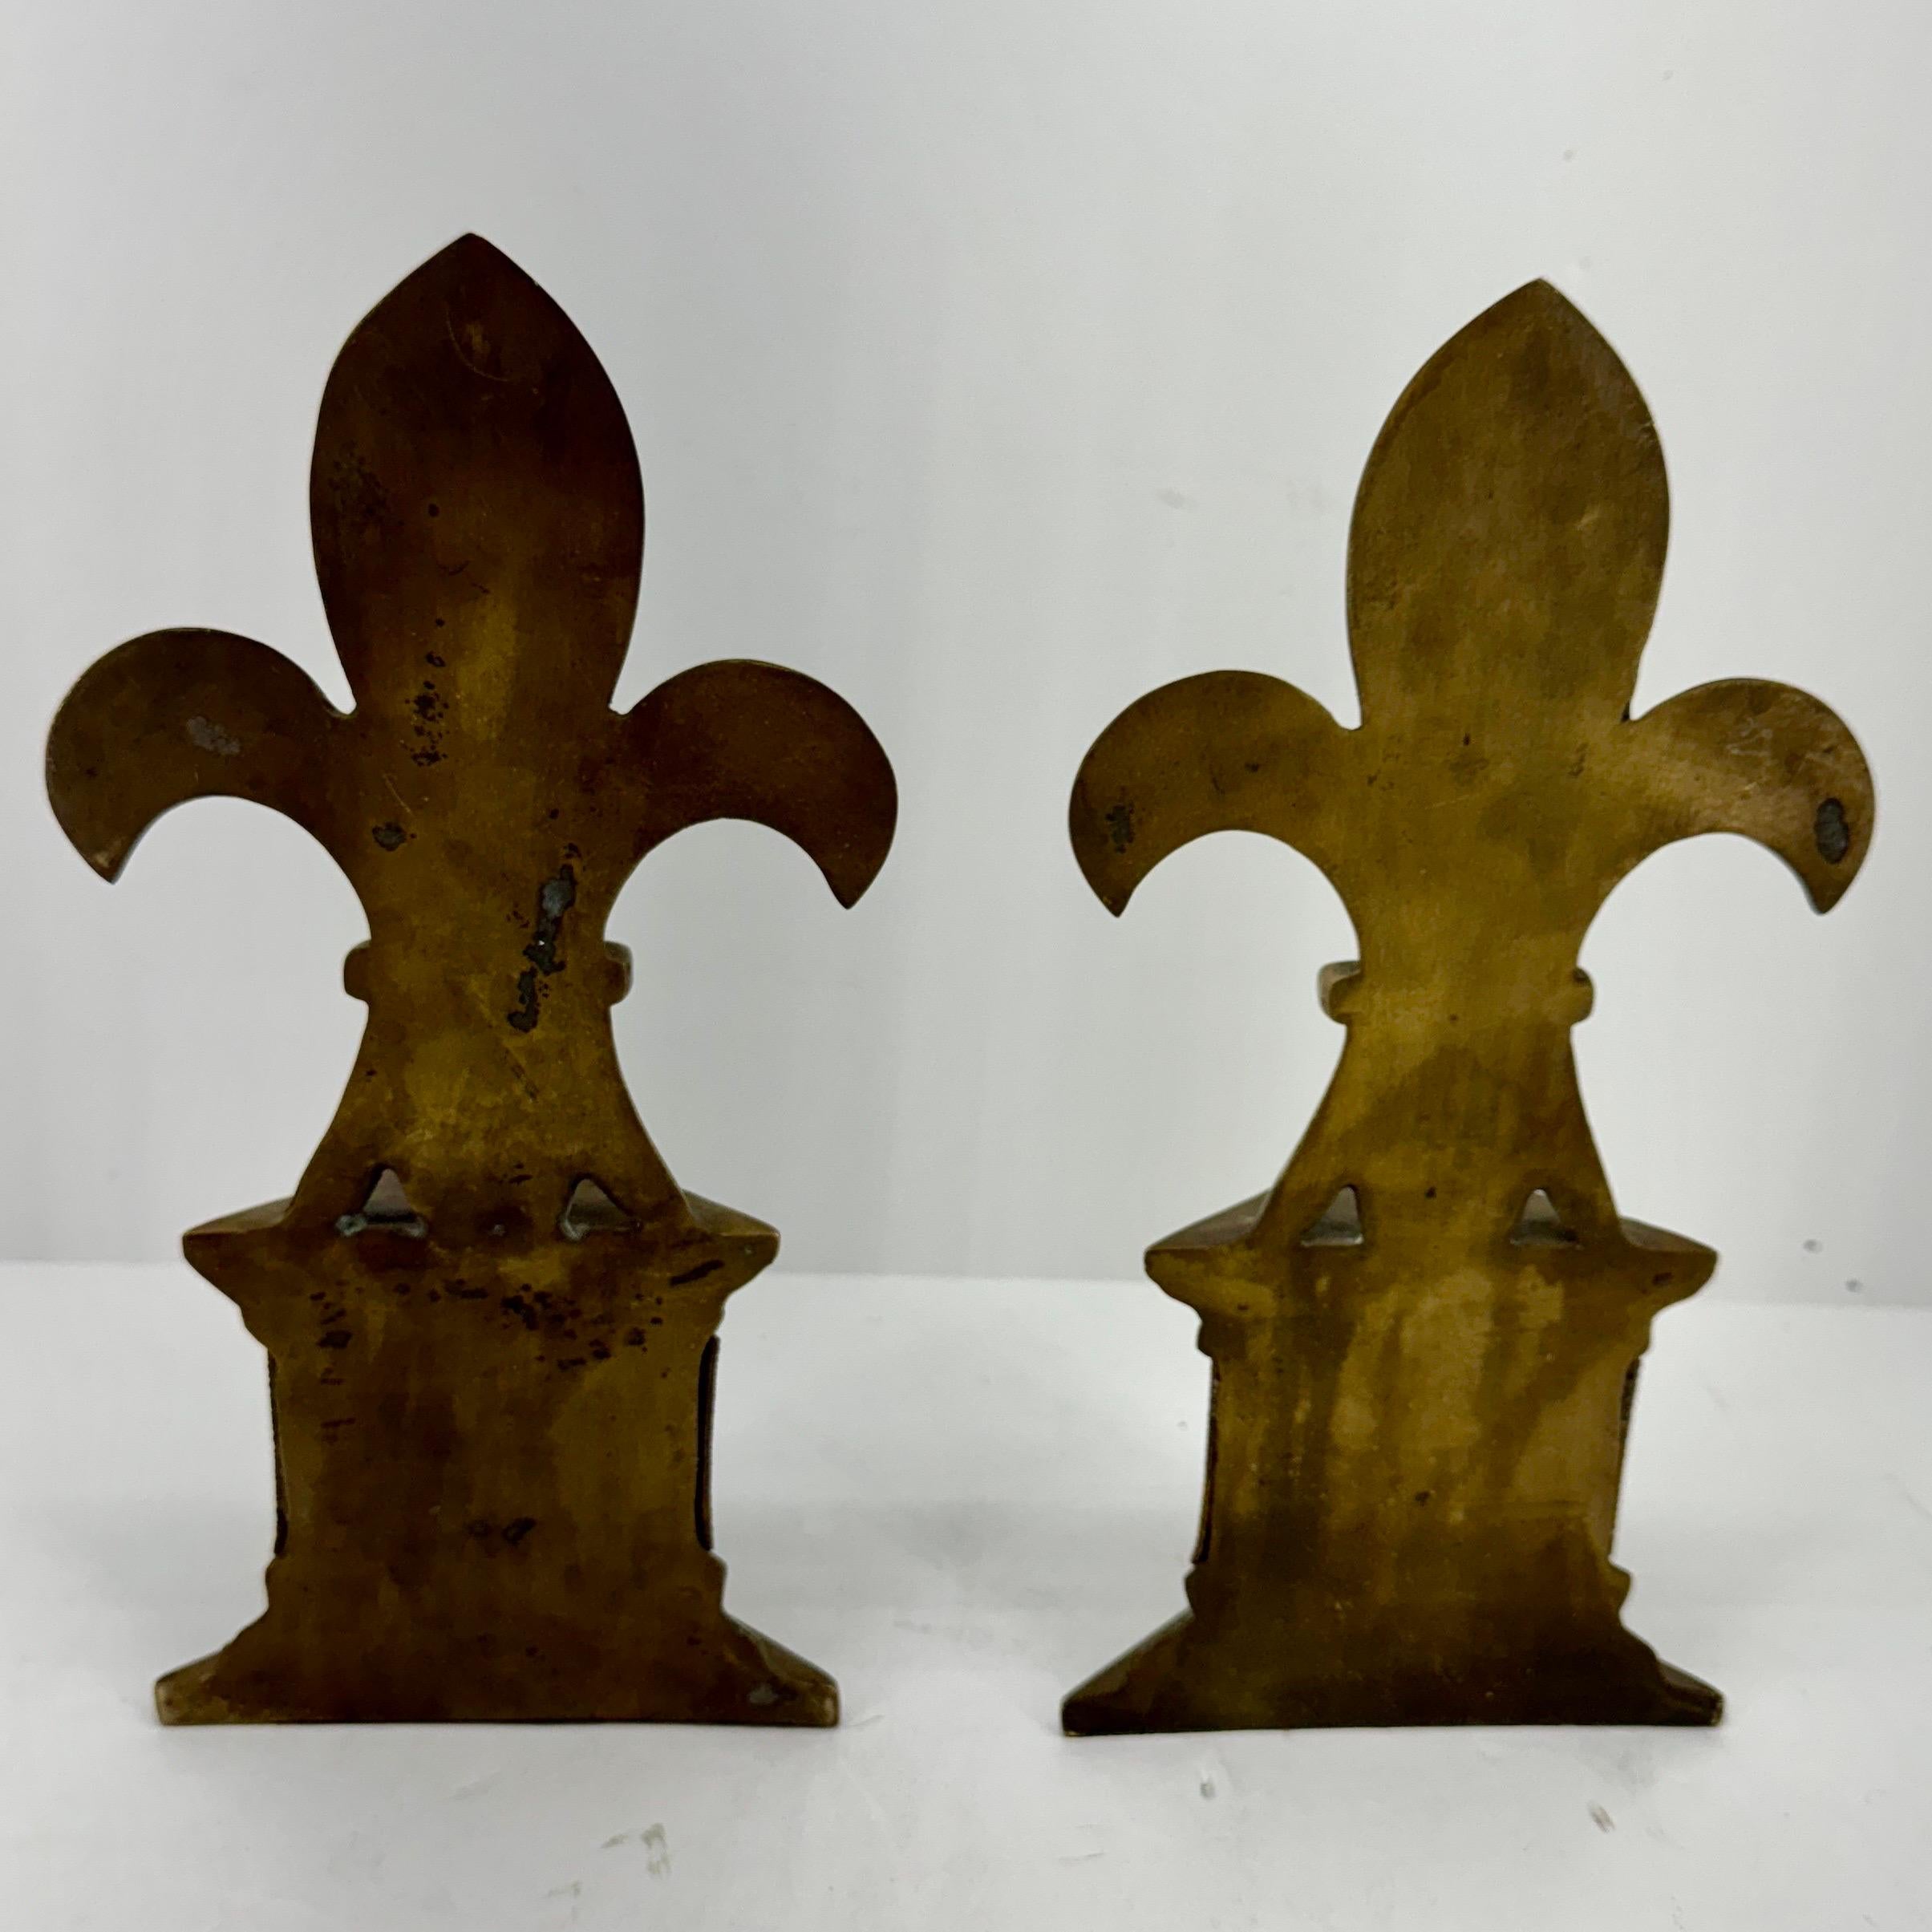  Pair of Mid-Century Brass Bookends with Louis Vuitton Monogram Fabric In Good Condition For Sale In Haddonfield, NJ